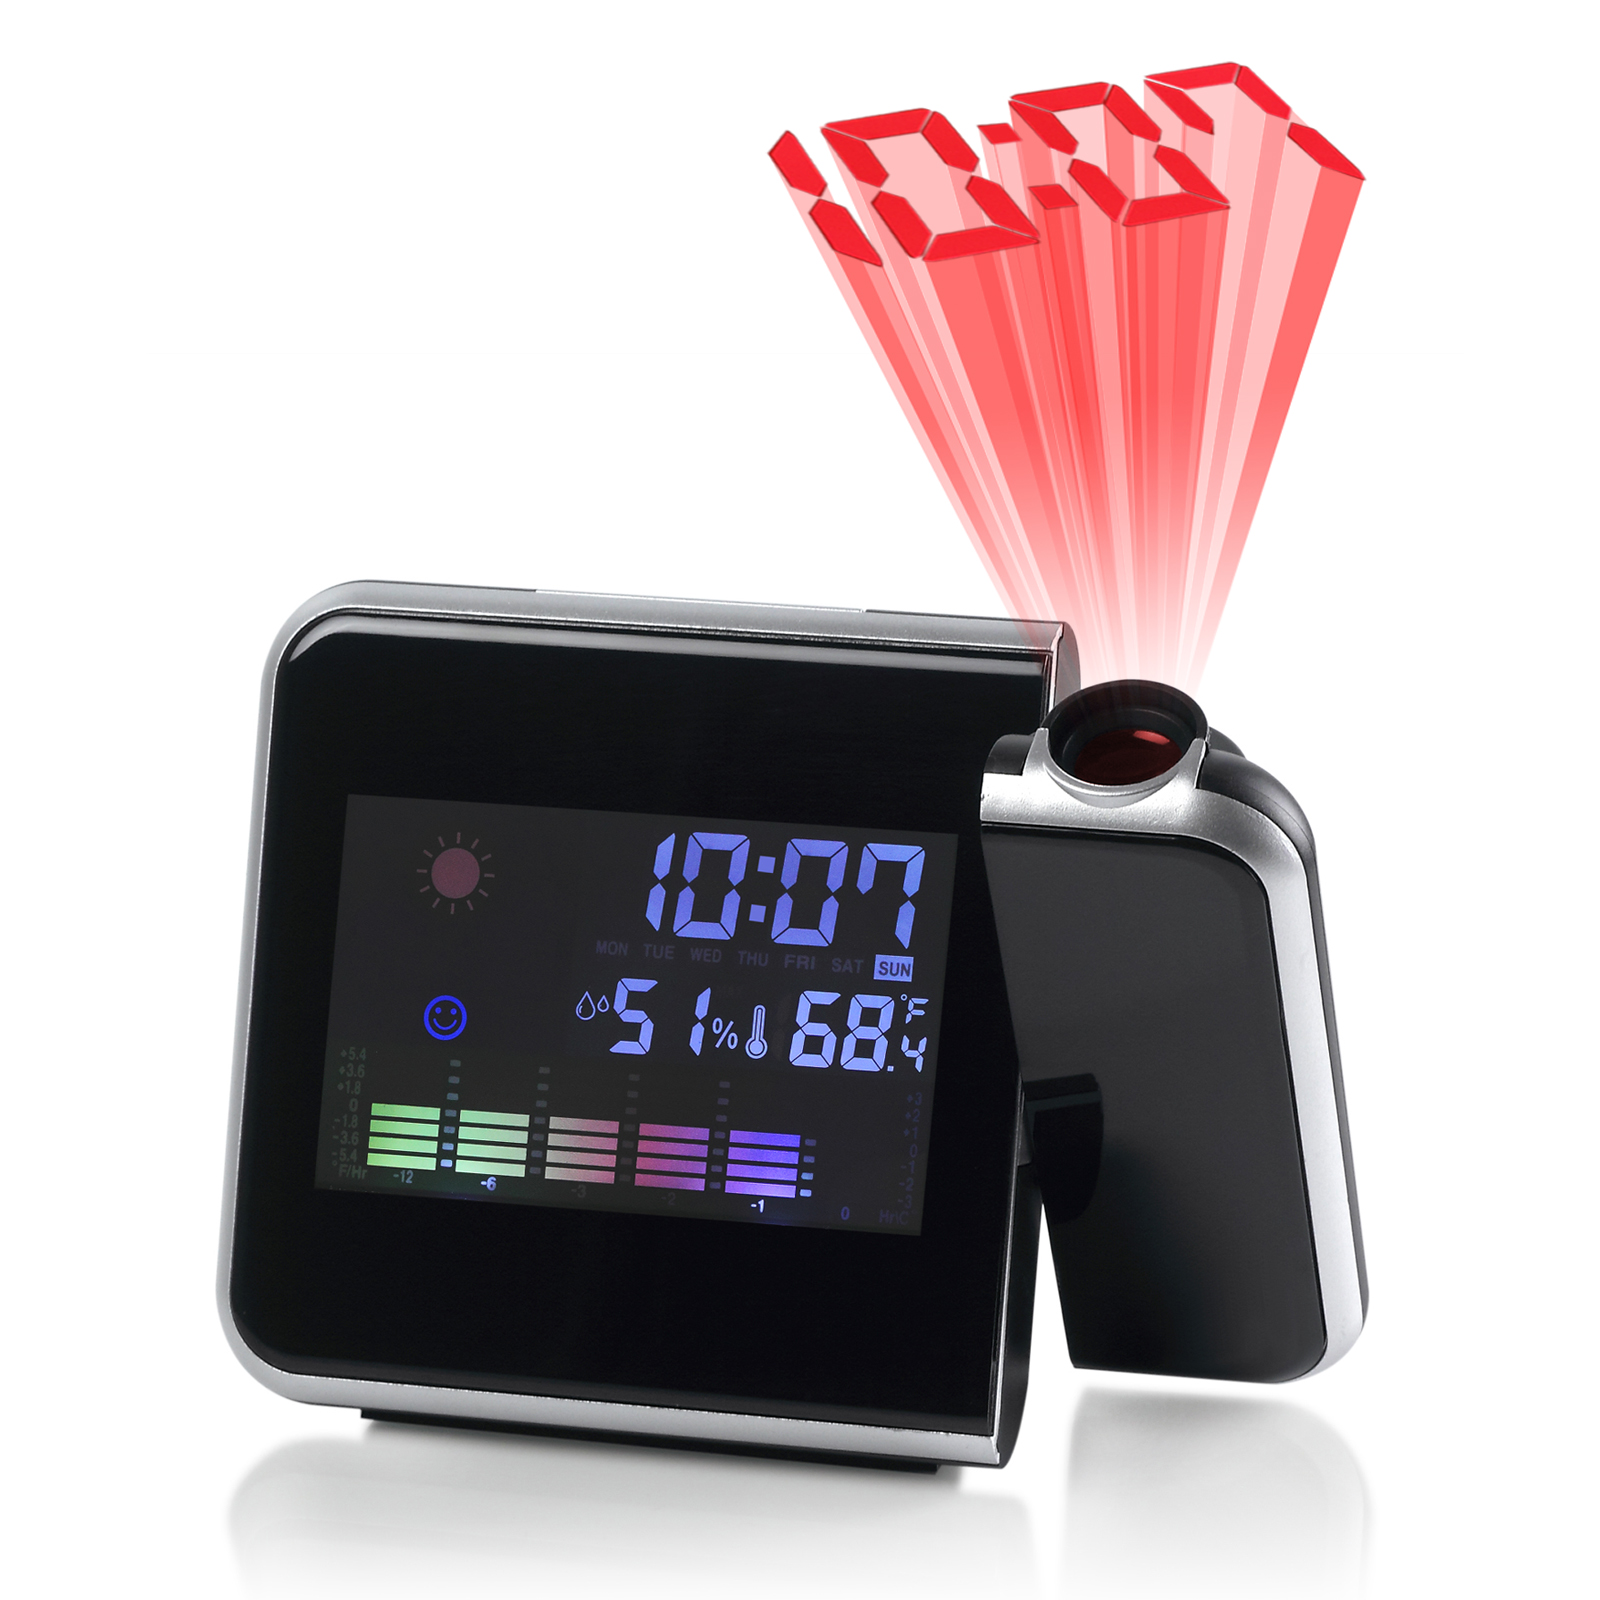 Digital LED LCD Time Projector Temperature Weather Station Colorful